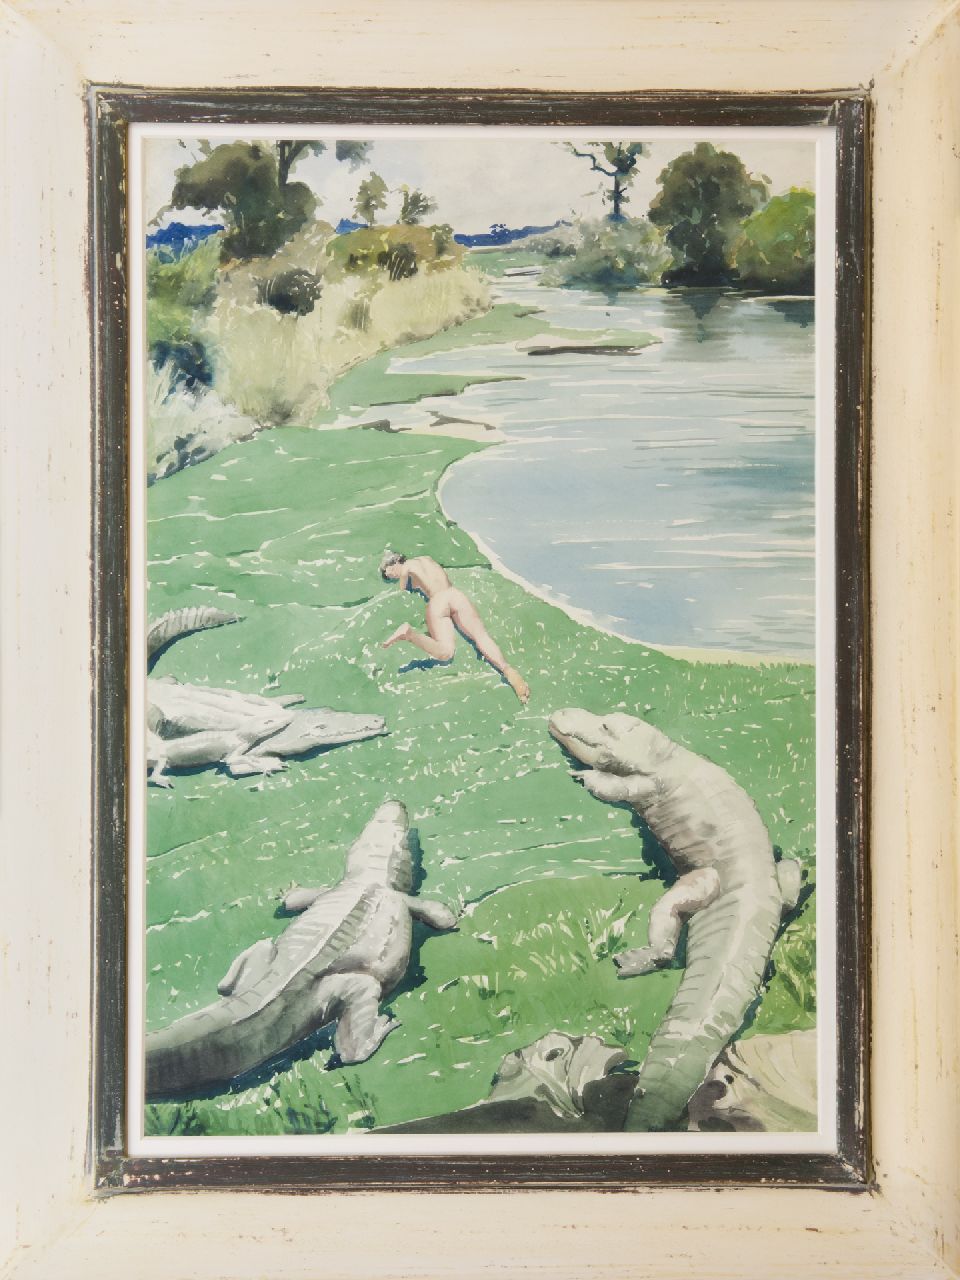 Kloos C.  | Cornelis Kloos | Watercolours and drawings offered for sale | Alligators, watercolour on paper 59.9 x 40.4 cm, signed l.r. and dated '51